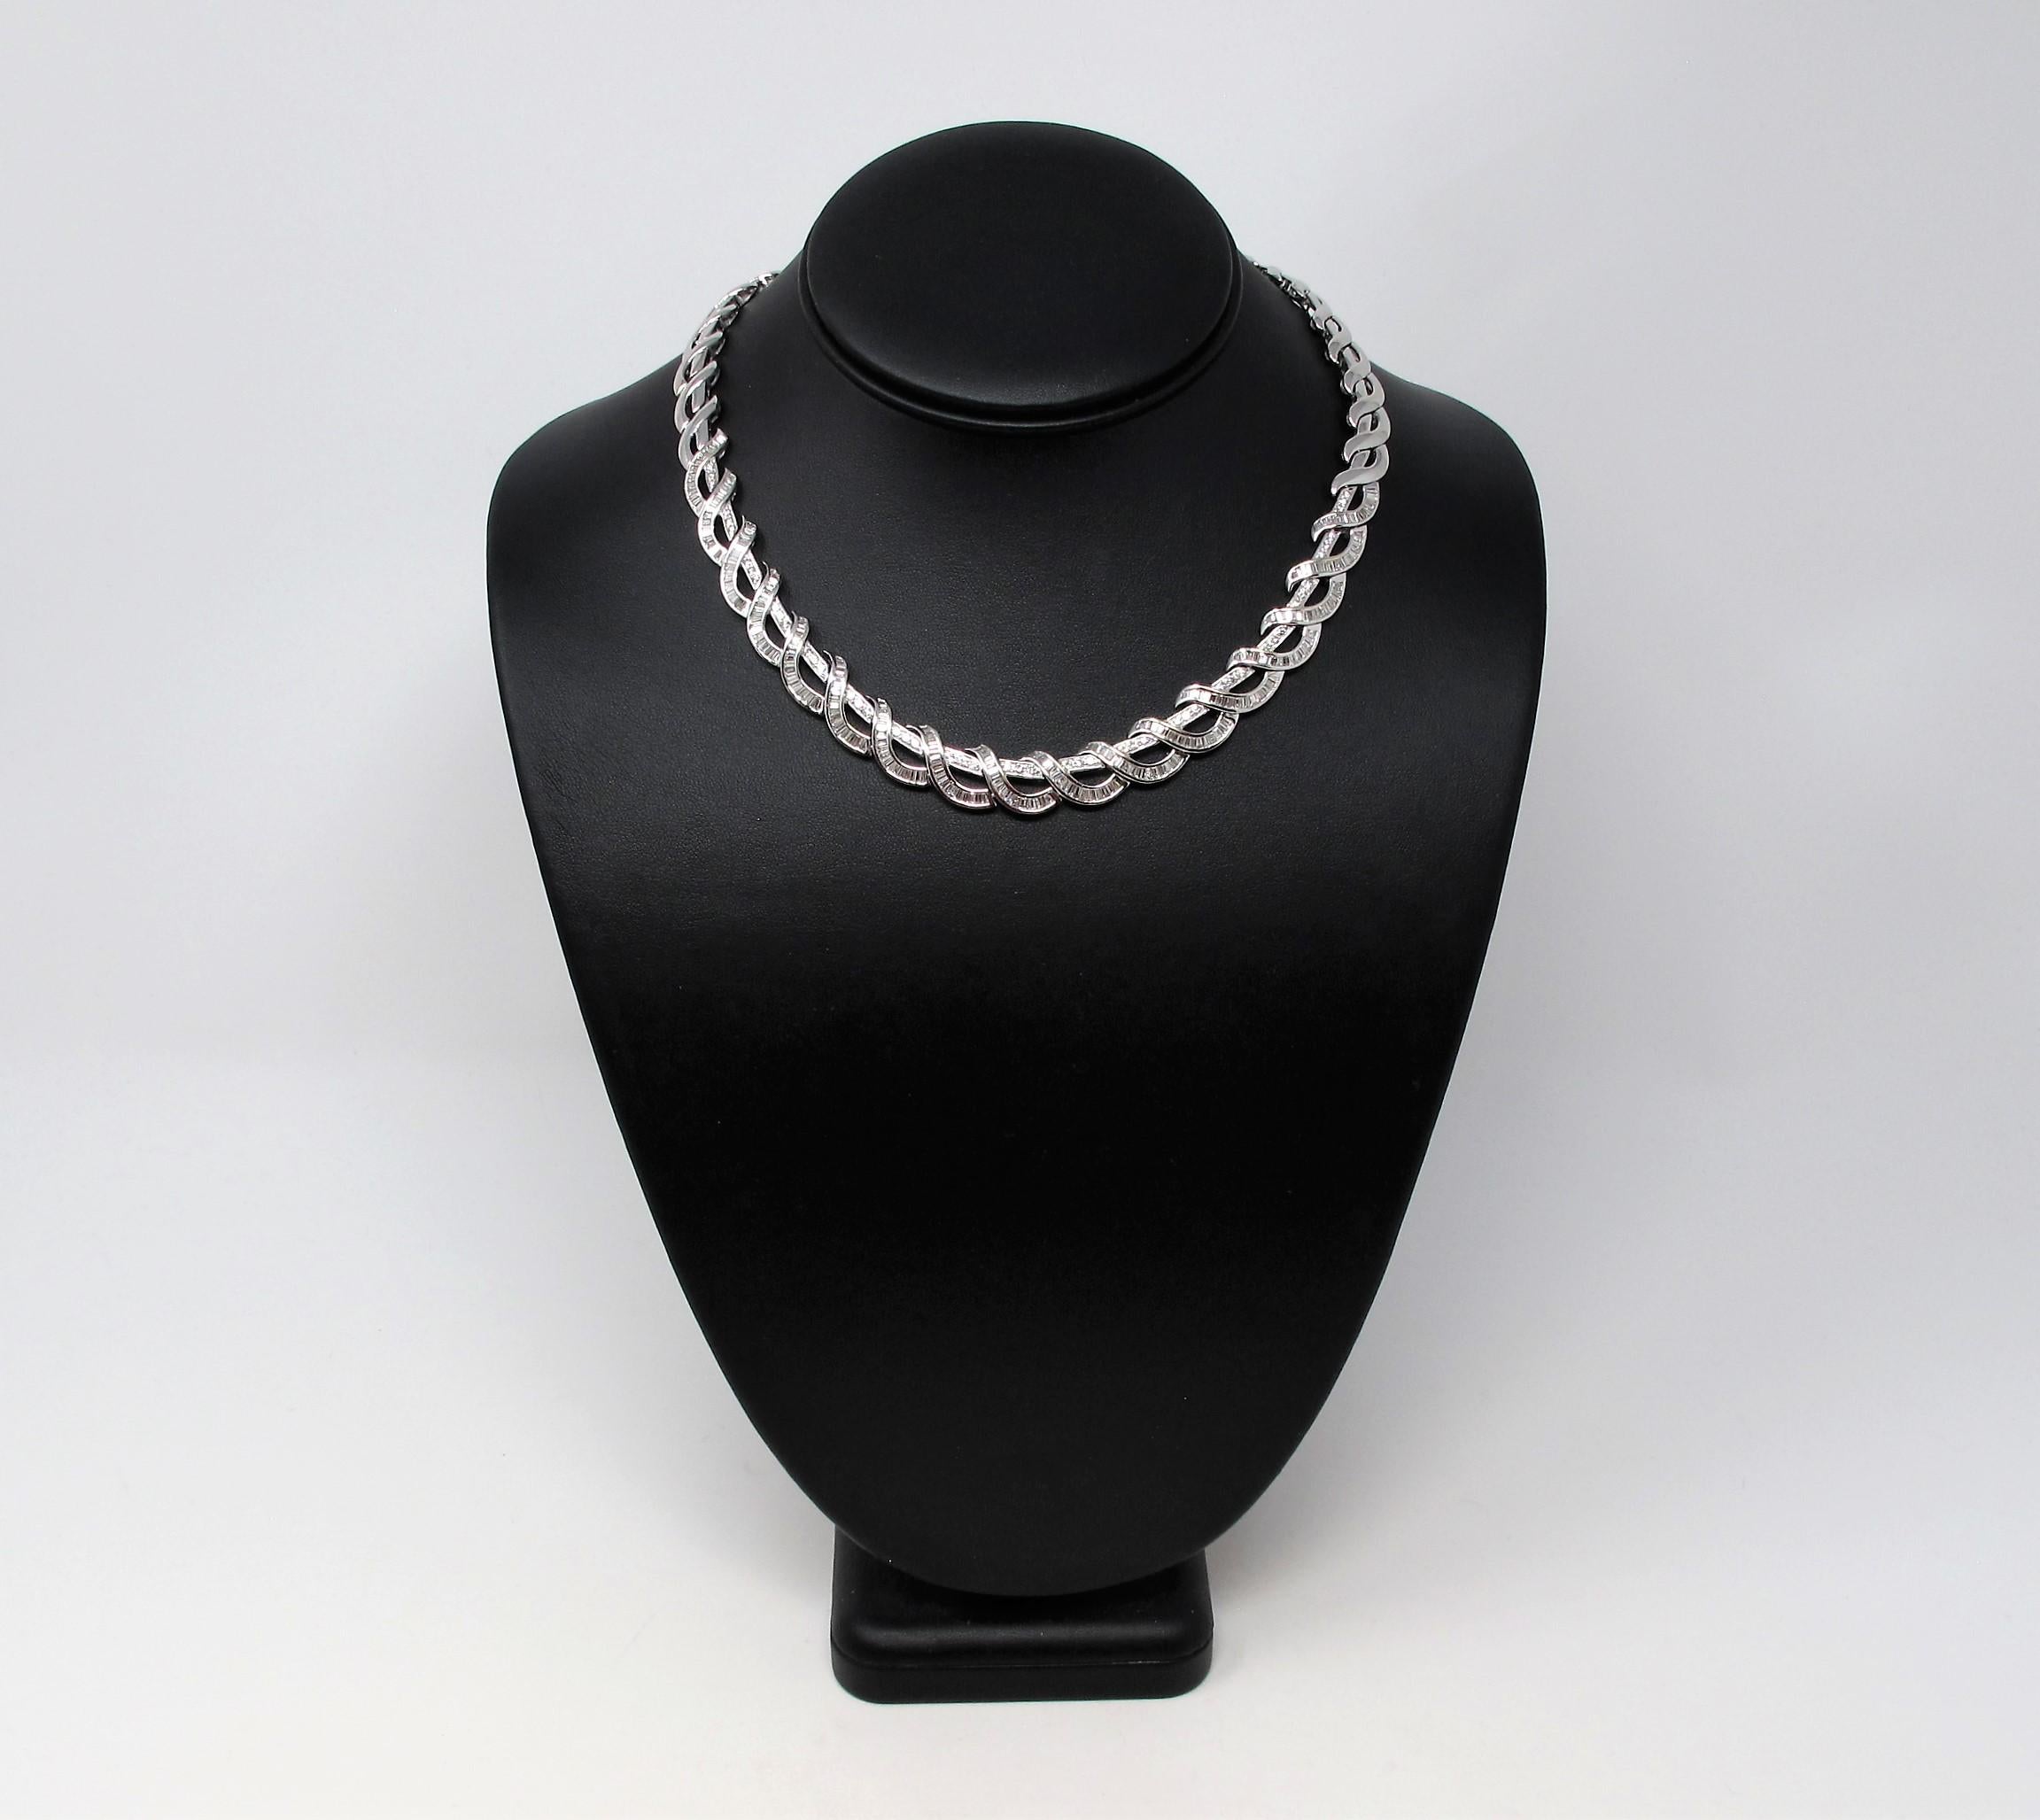 This elegant, graduated diamond necklace will be your go-to necklace for all occasions. Its timeless style and feminine design will elevate any look that it's paired with. It offers incredible sparkle without being over the top. Pair it with jeans